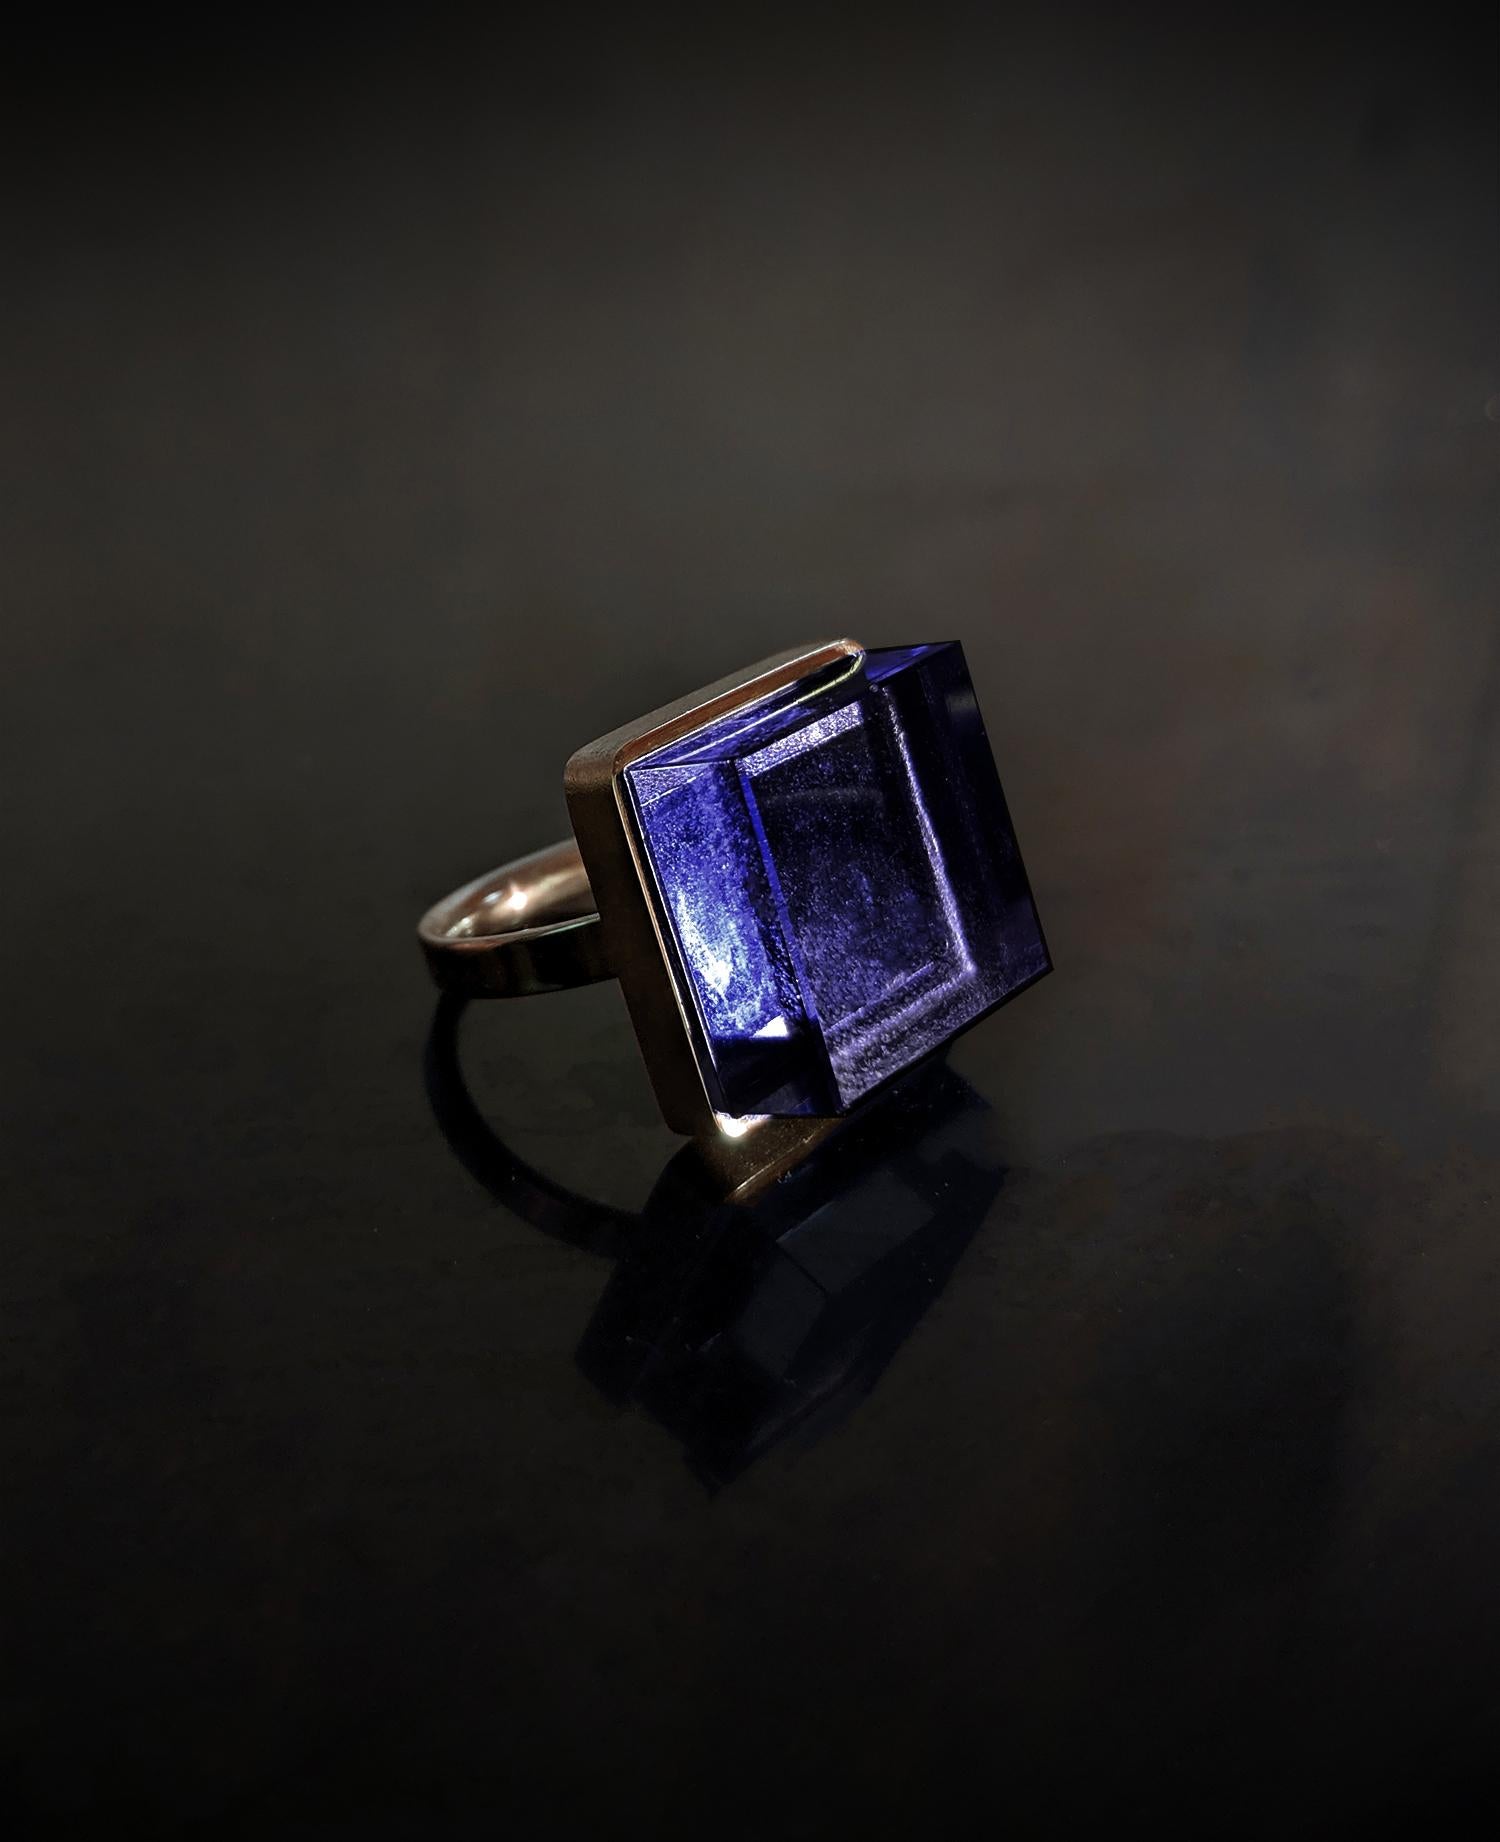 This men's Art Deco-style ring is made of 14 karat yellow gold and features a 15x15x8 mm genuine amethyst. It has been featured in publications such as Harper's Bazaar and Vogue UA.

The ring embodies the Art Deco spirit and is suitable for both men